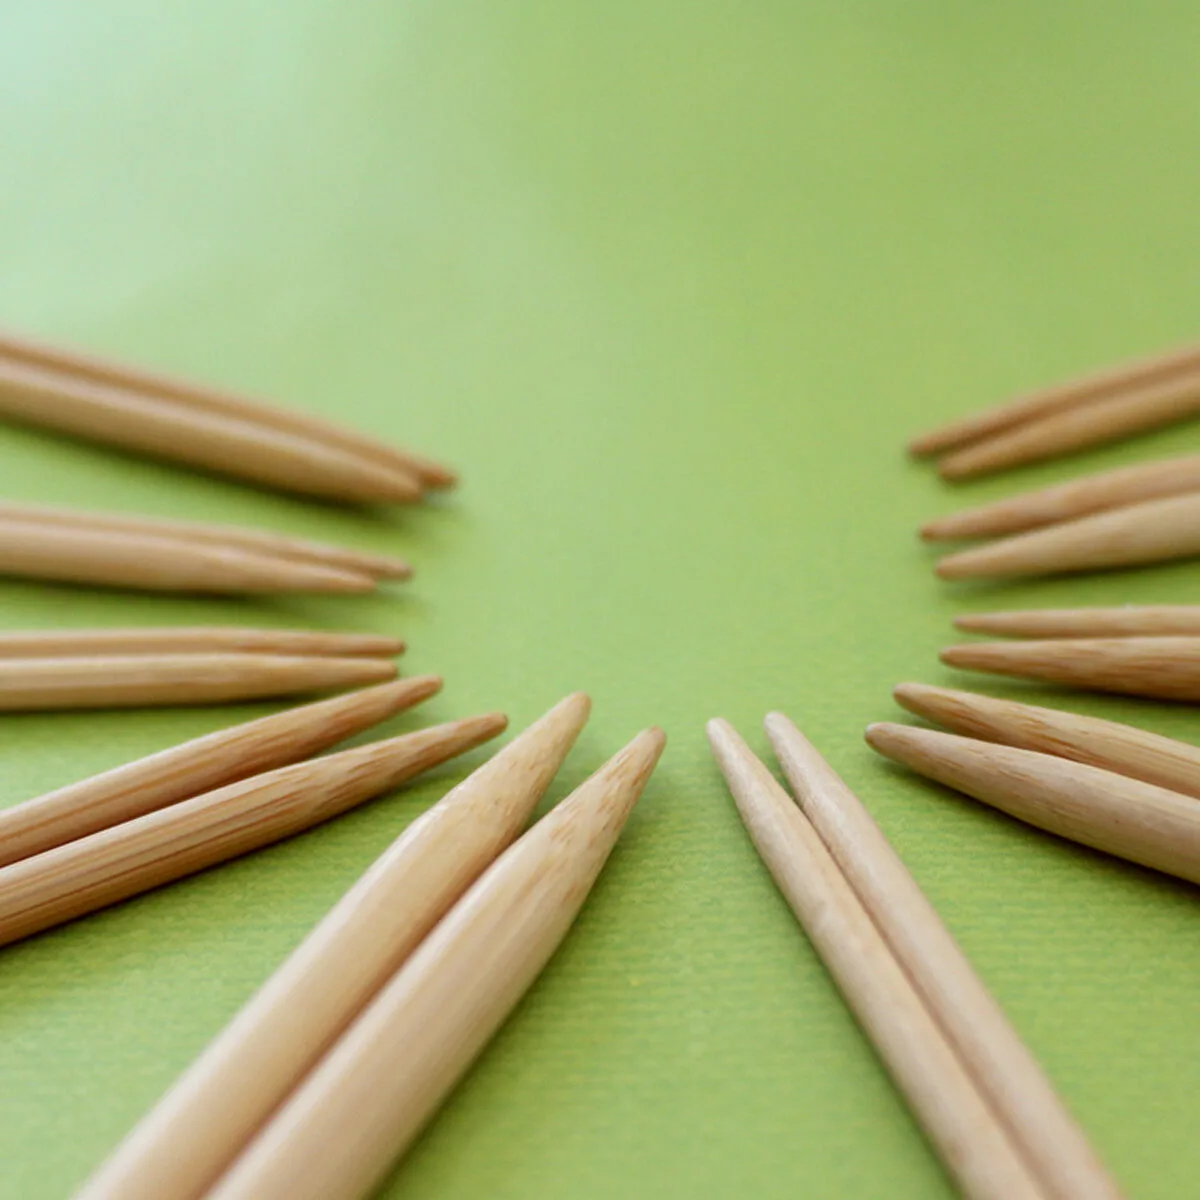 How to Select Knitting Needles for Beginners - Studio Knit